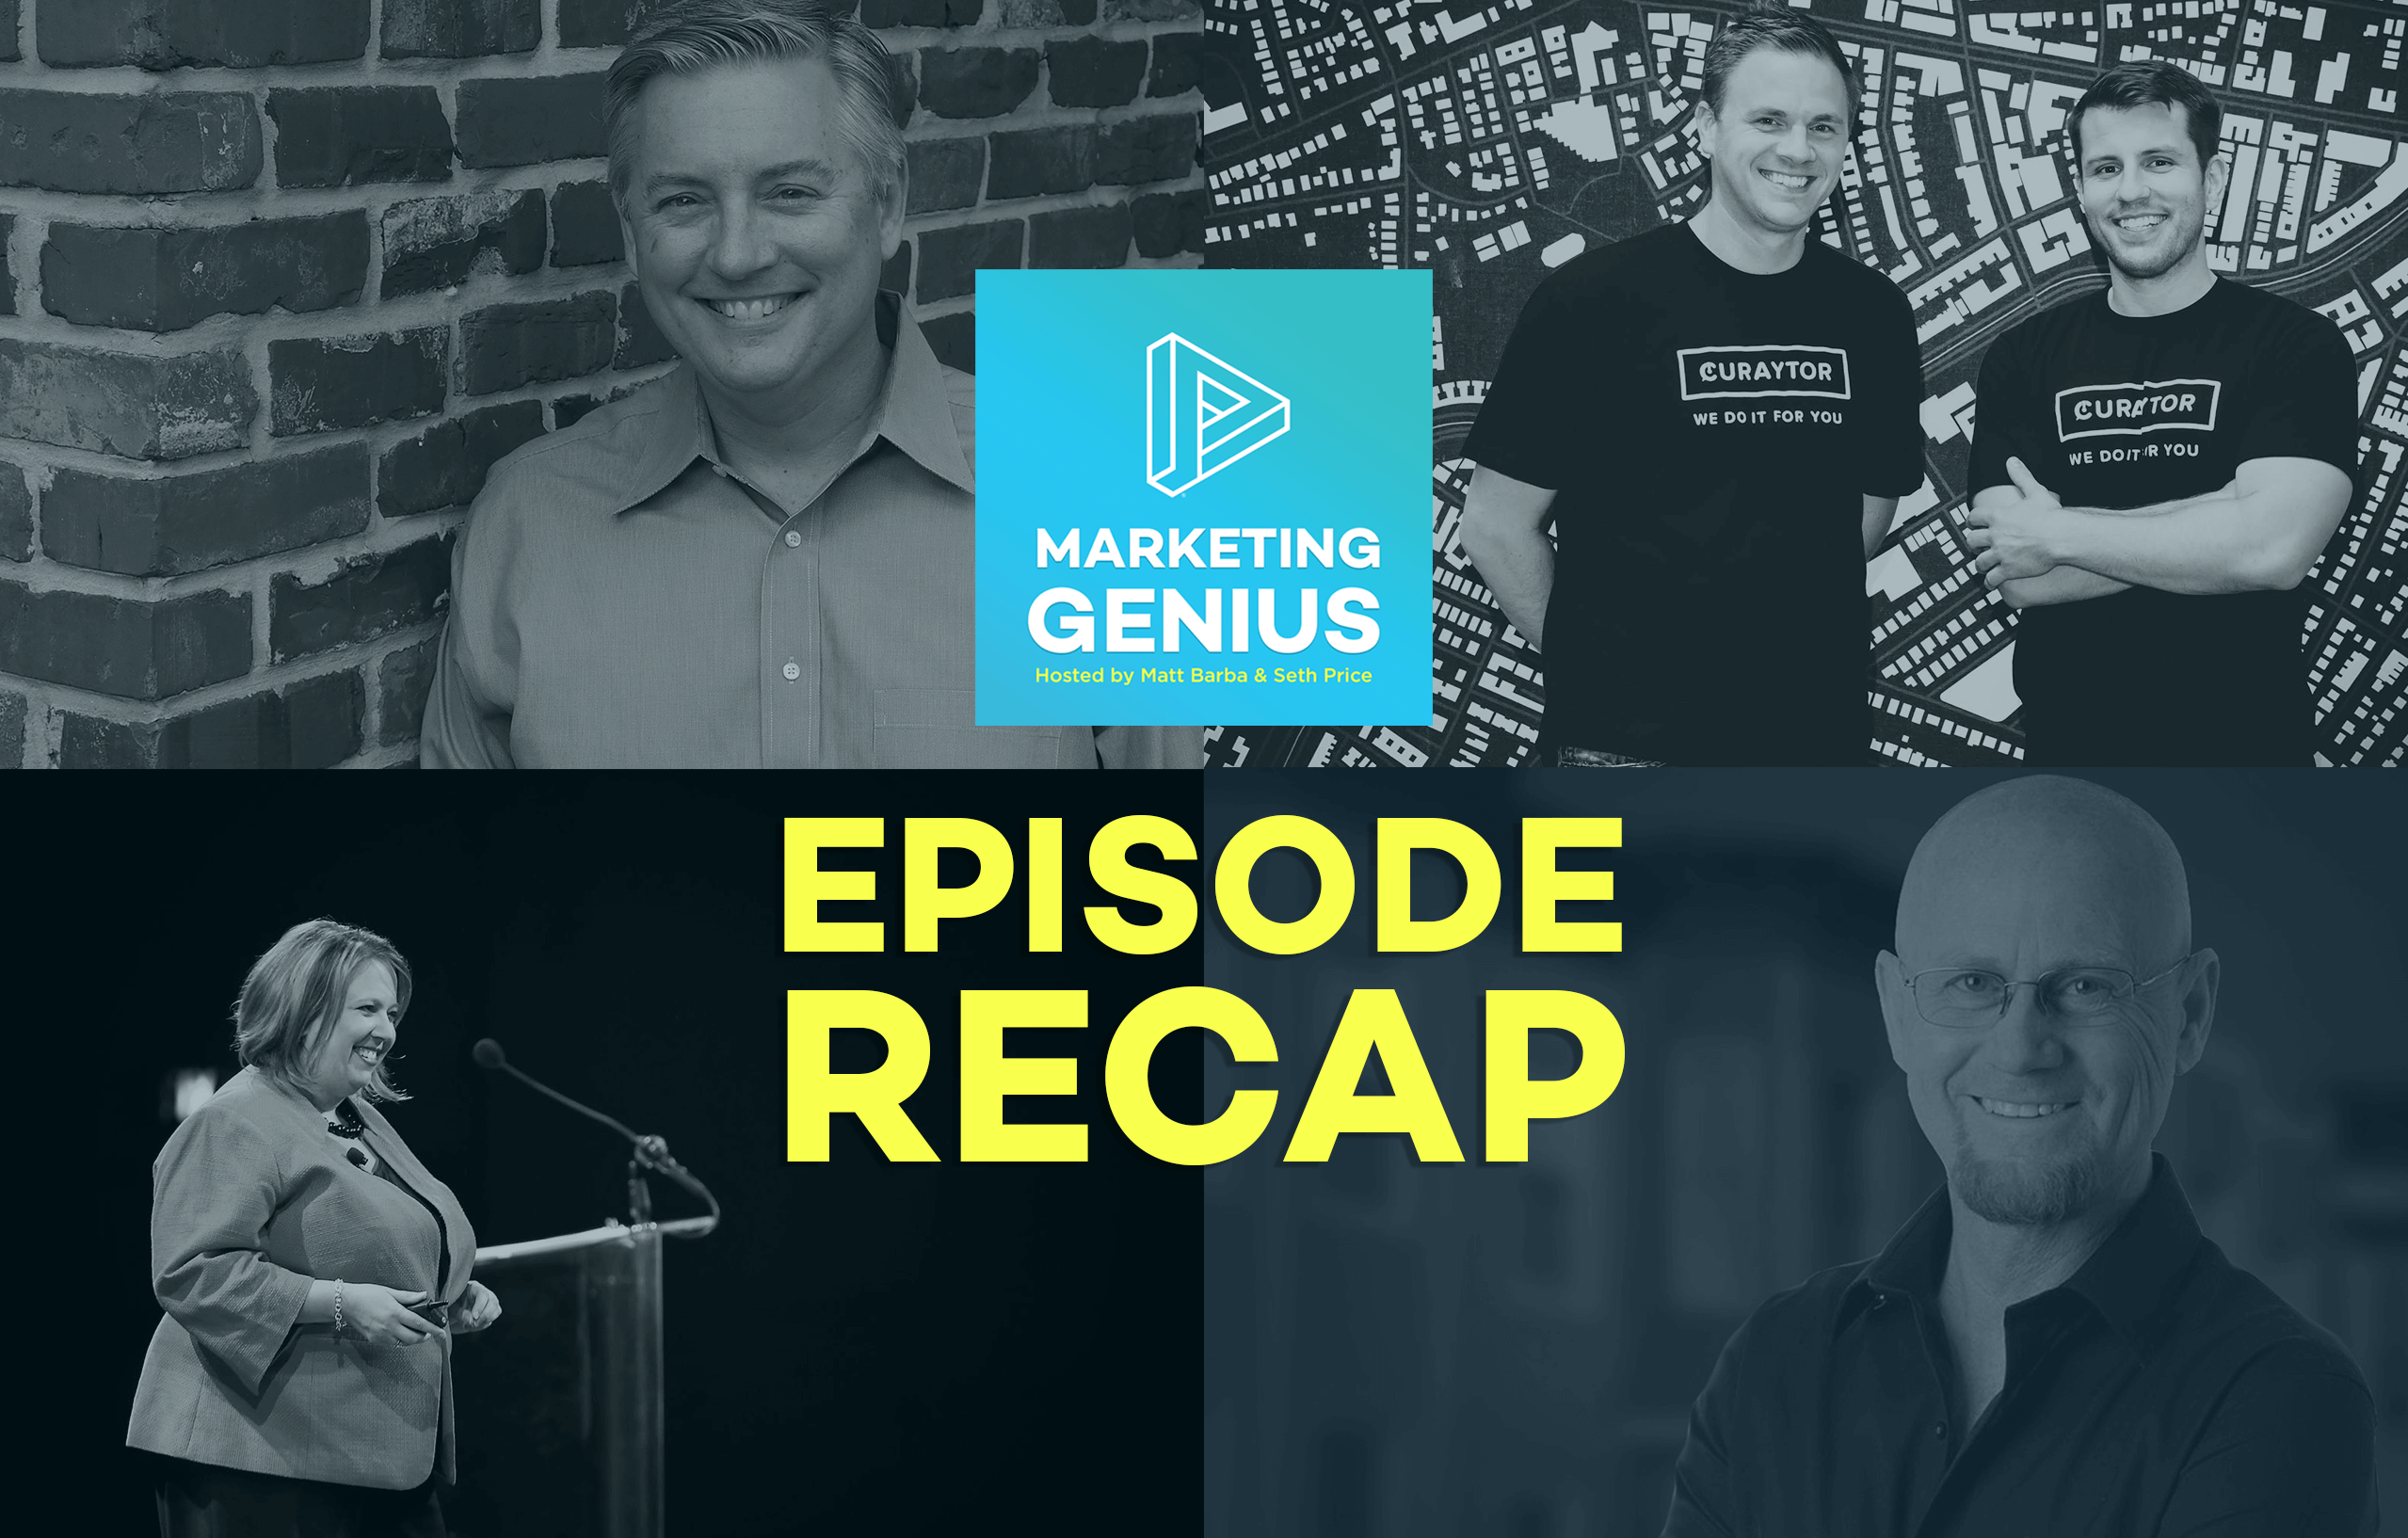 Marketing Genius Podcast Recap: Creating Conversations, Satisfying Clients, and More